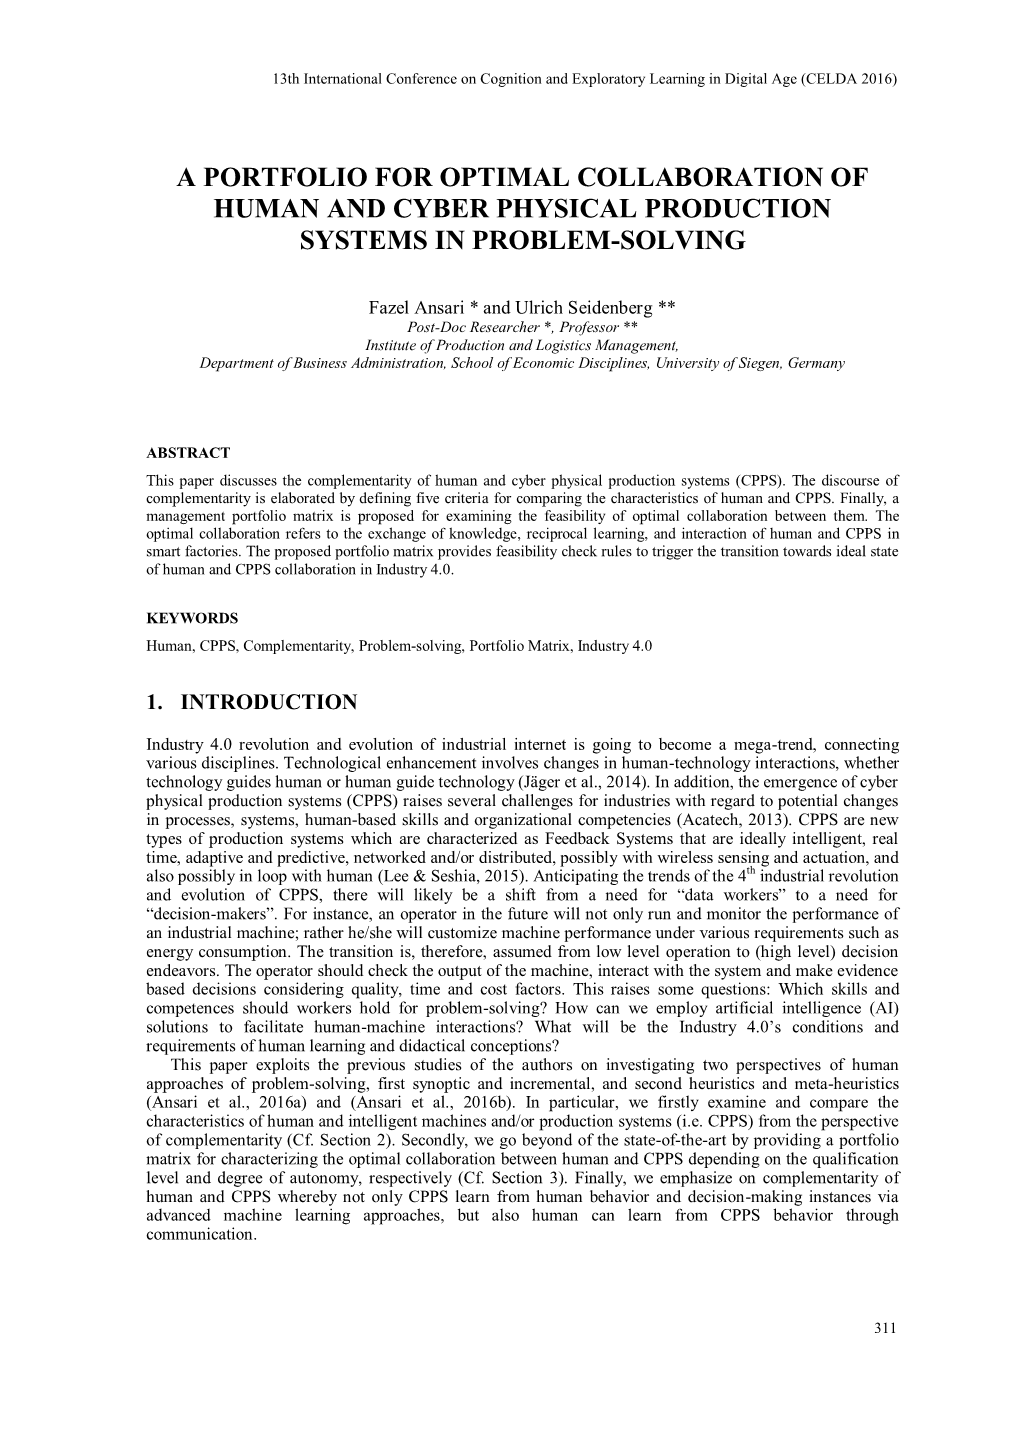 A Portfolio for Optimal Collaboration of Human and Cyber Physical Production Systems in Problem-Solving